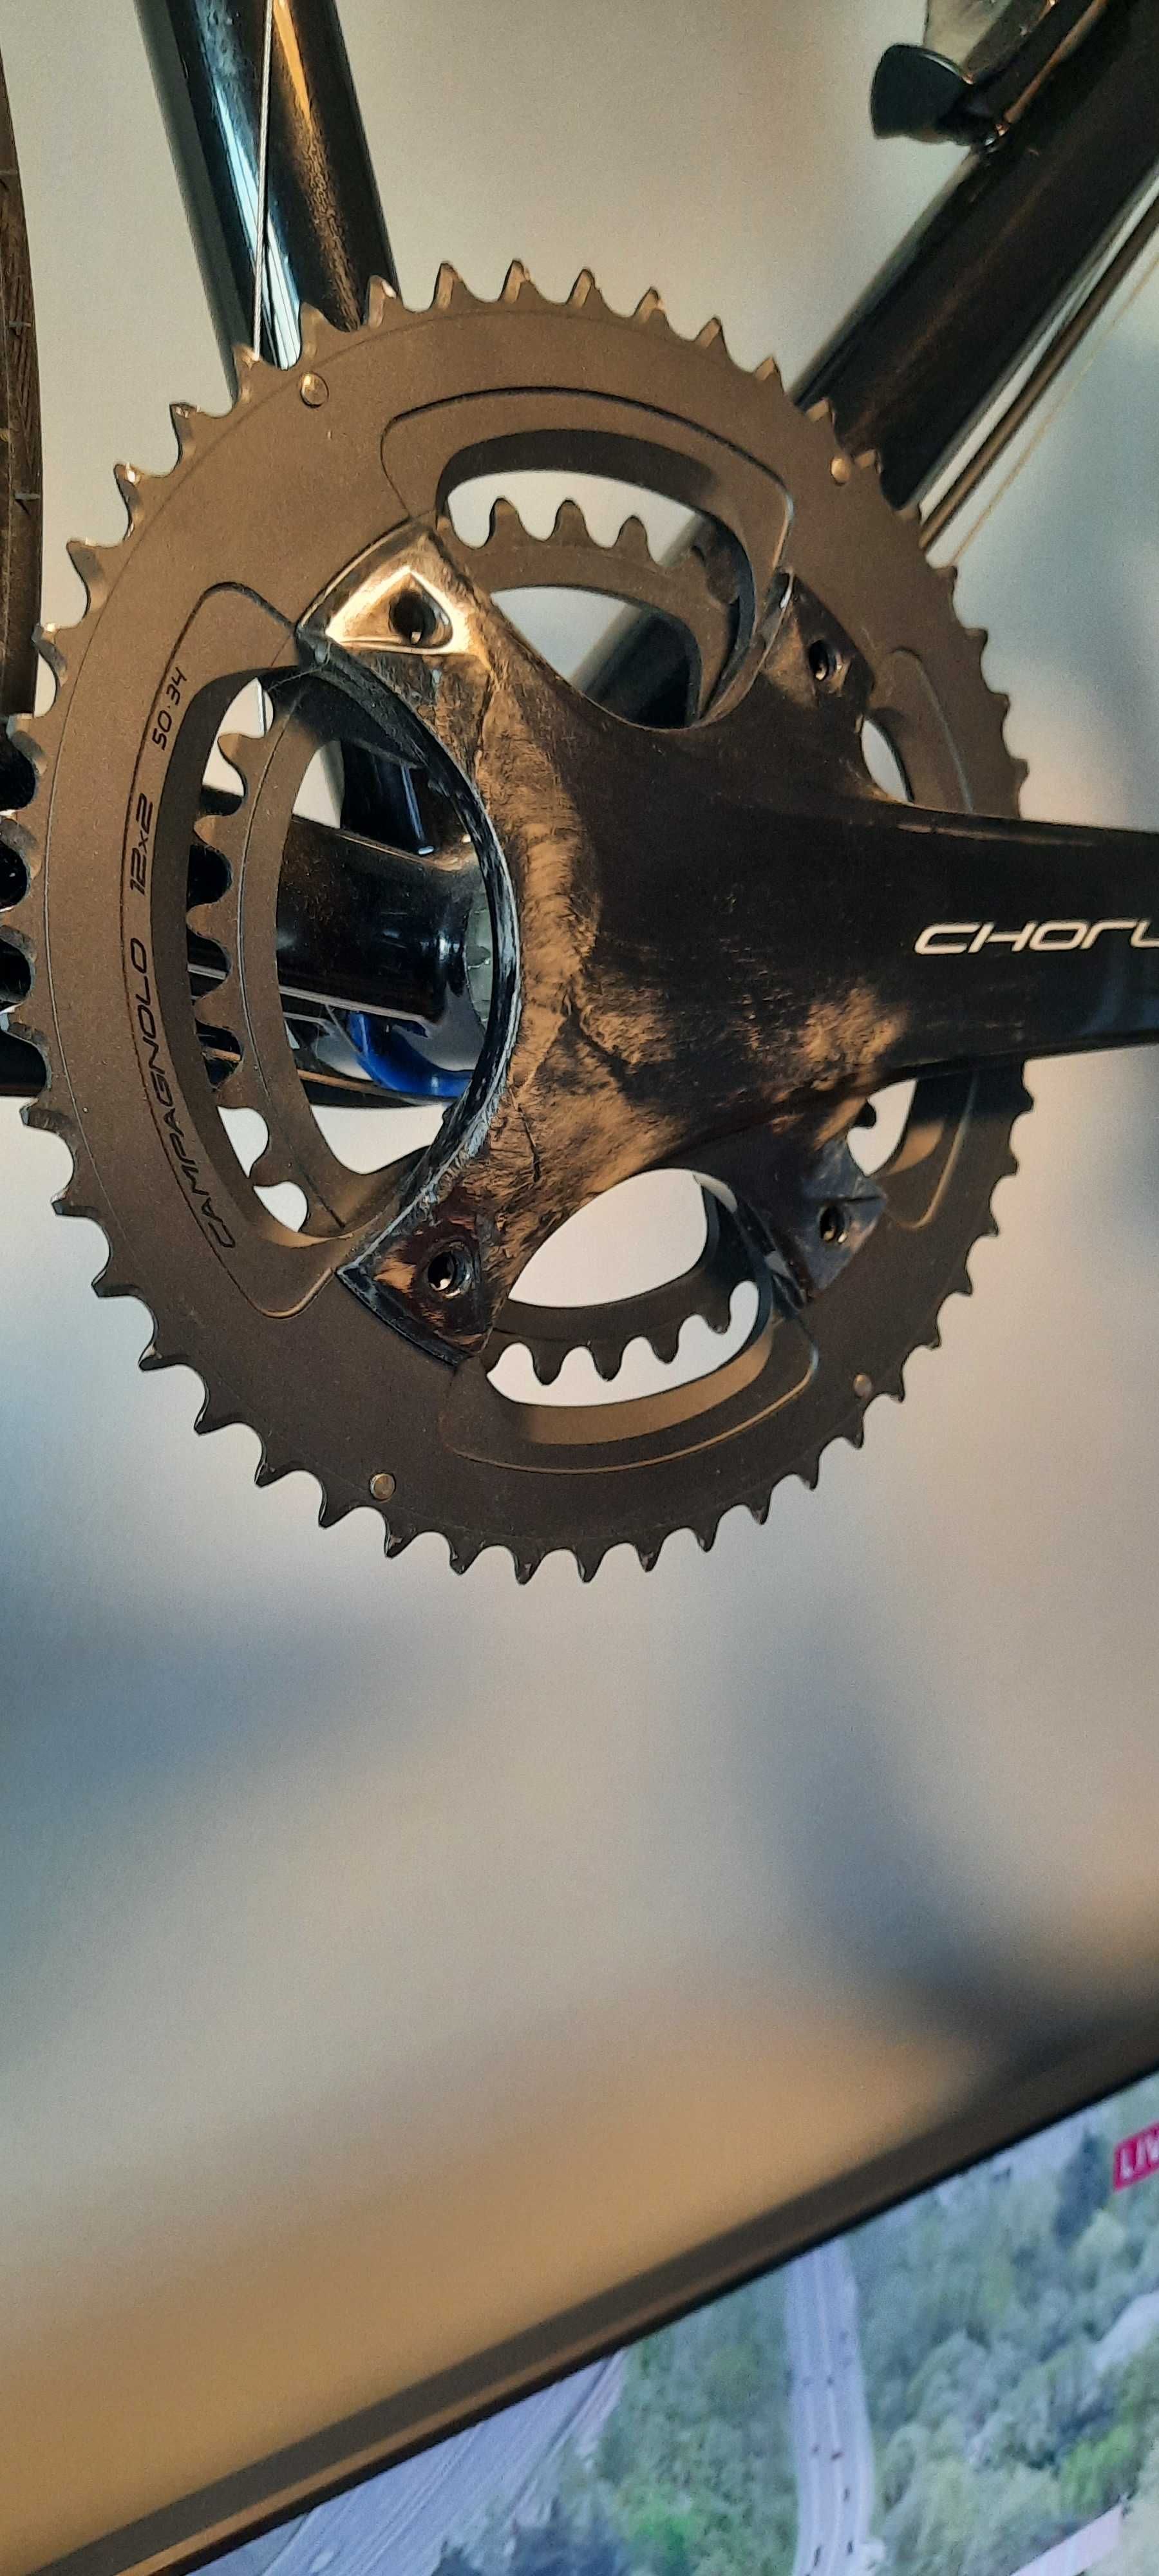 Groupset Campagnolo Chorus 12 speed disc